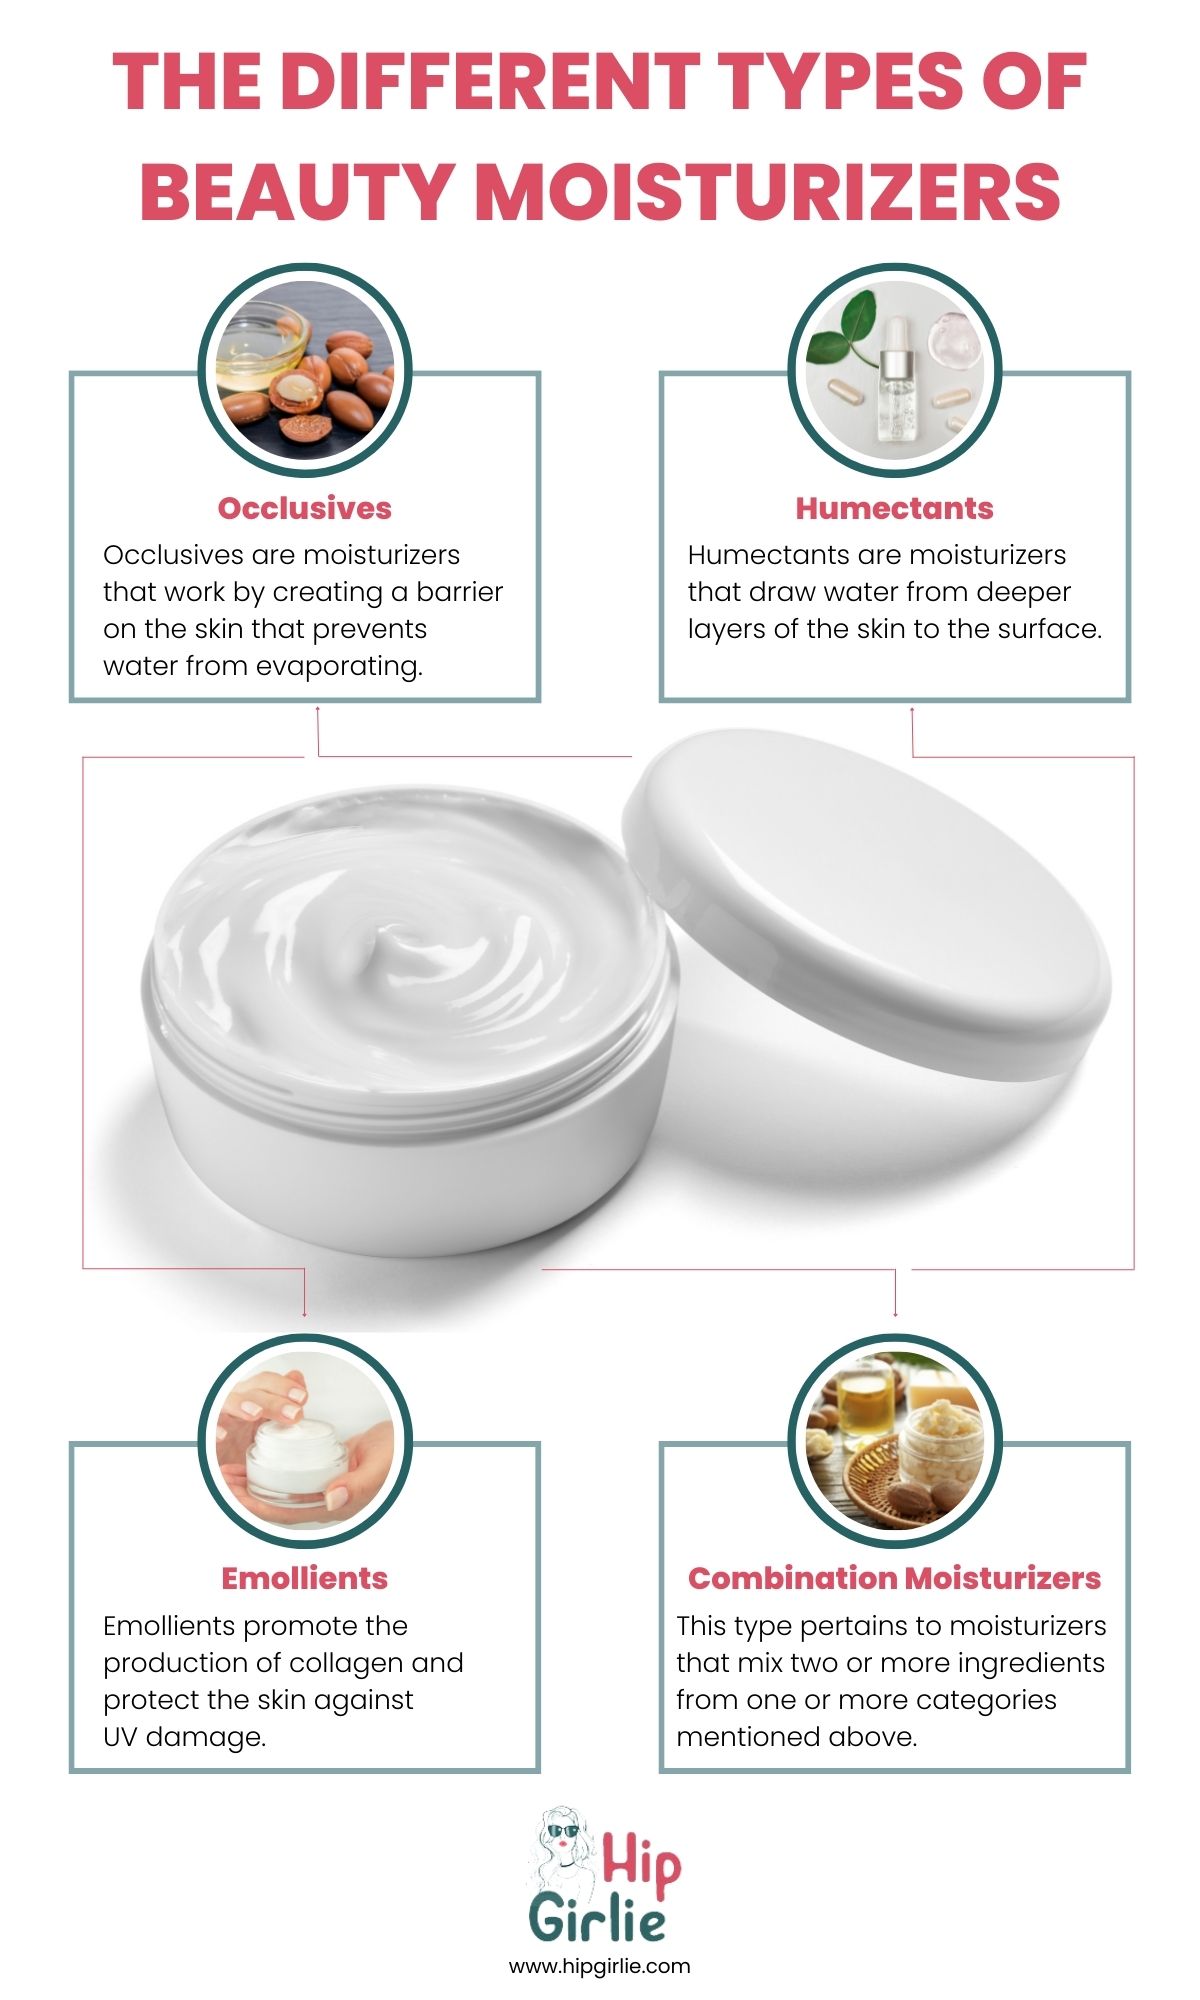 The Different Types of Beauty Moisturizers